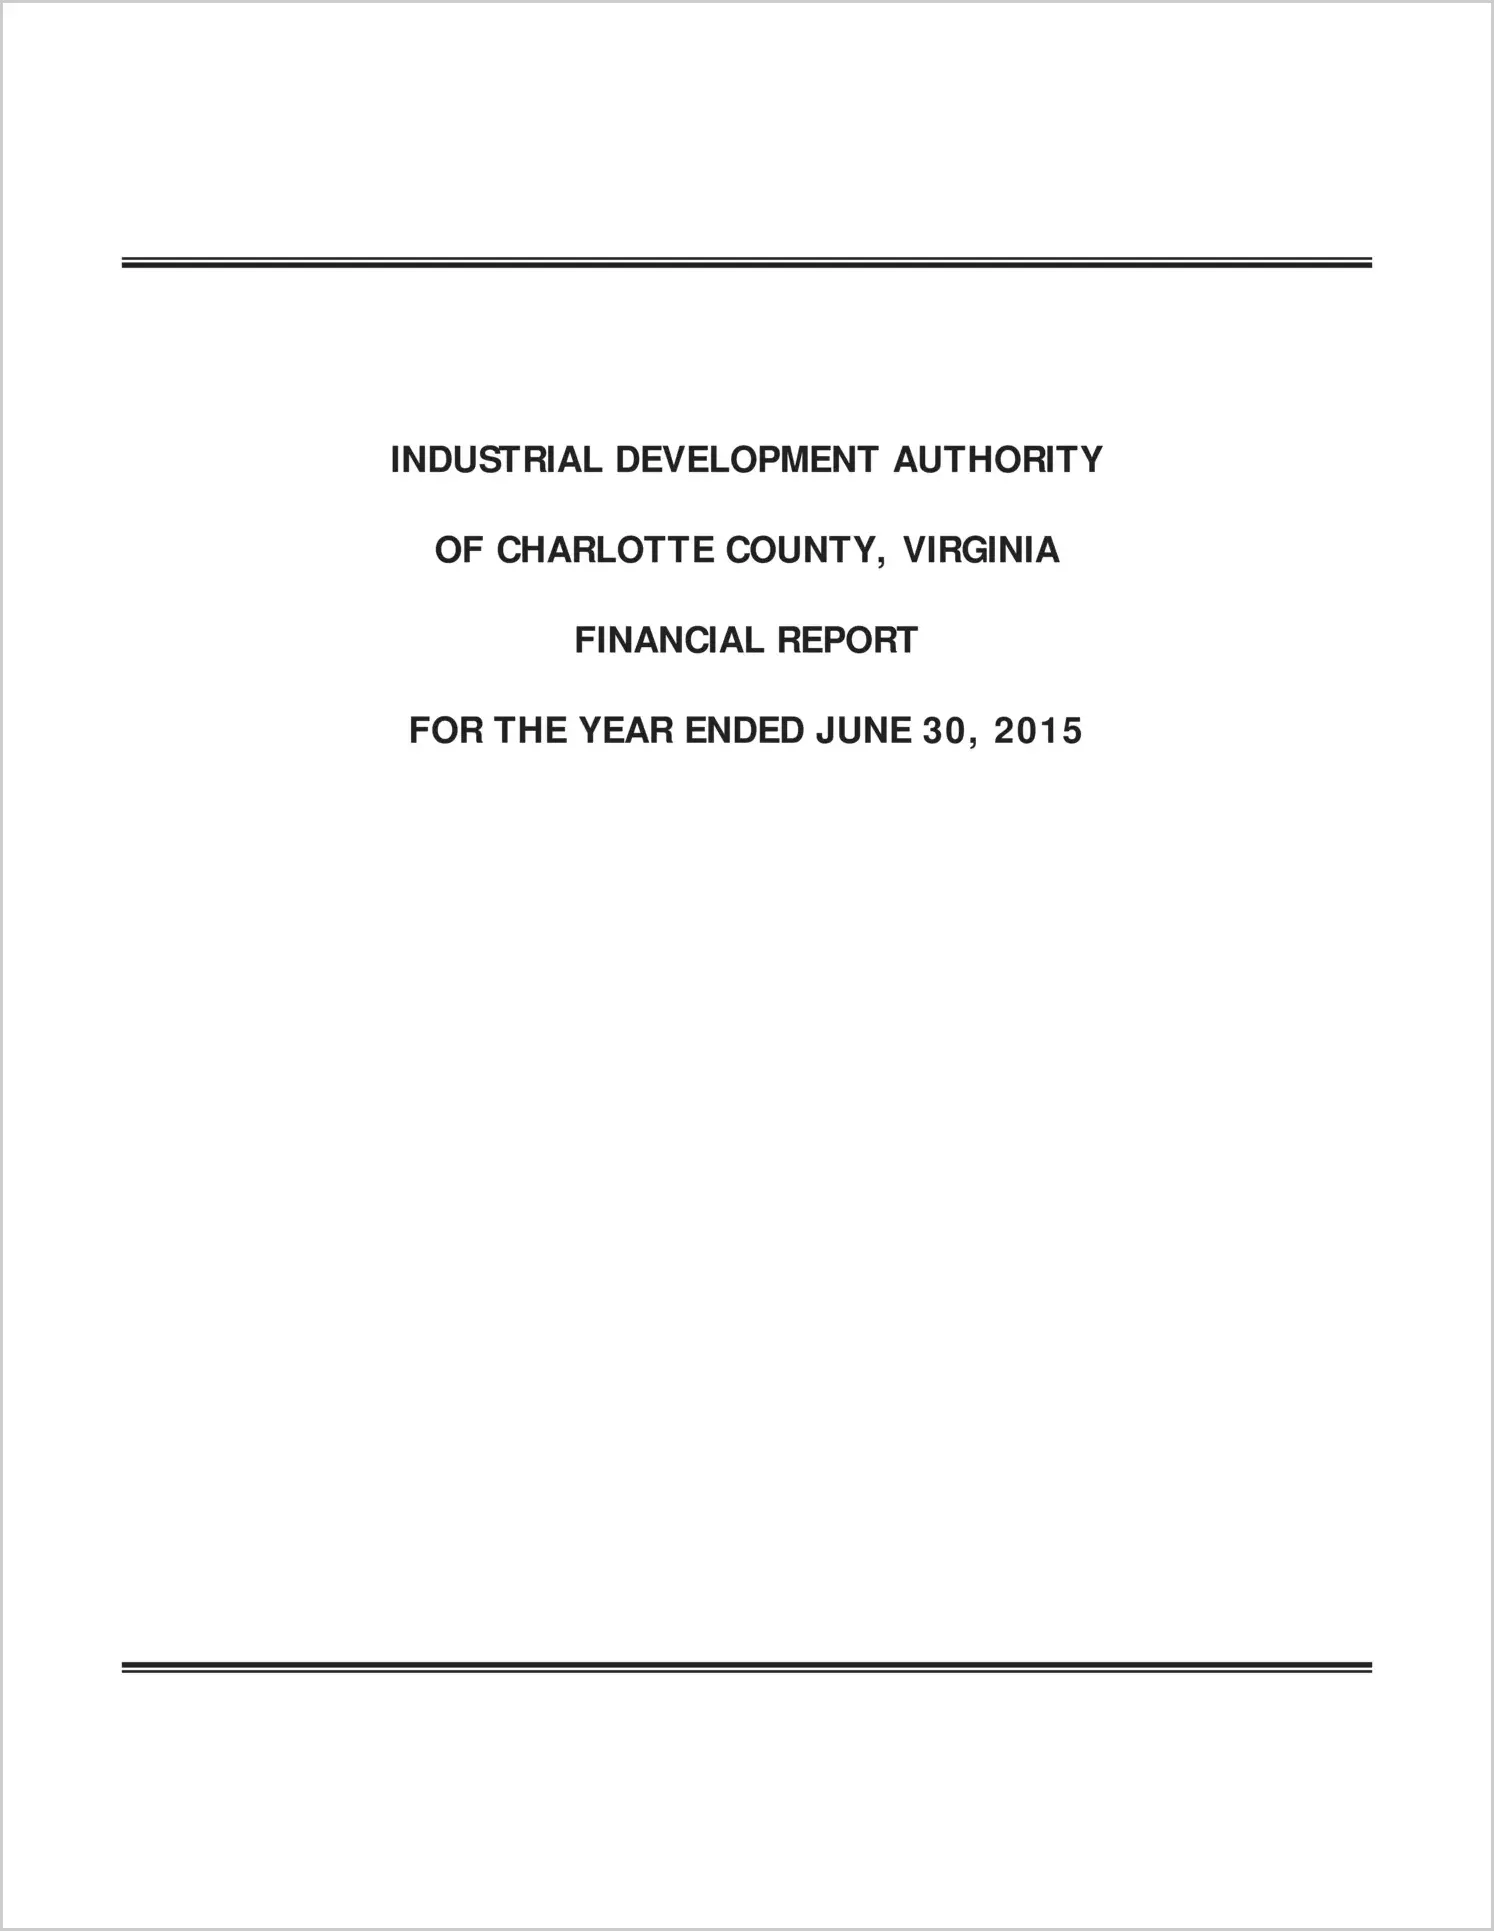 2015 ABC/Other Annual Financial Report  for Charlotte Industrial Development Authority